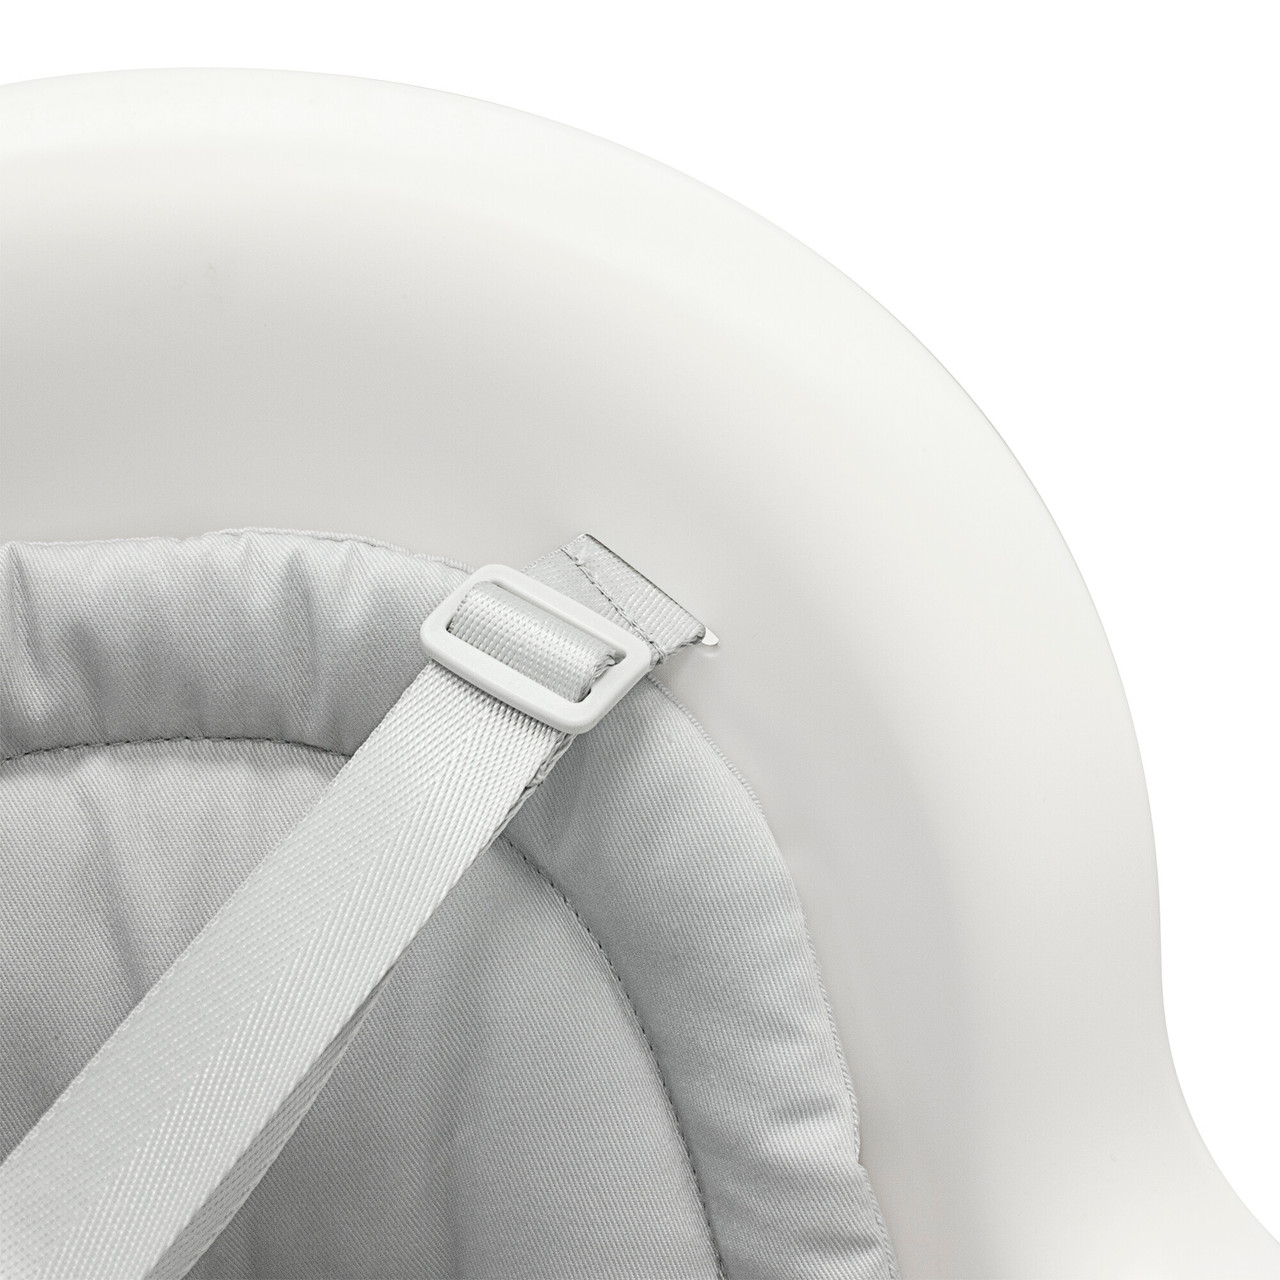 Boon Grub Adjustable Baby High Chair - Includes Dishwasher Safe